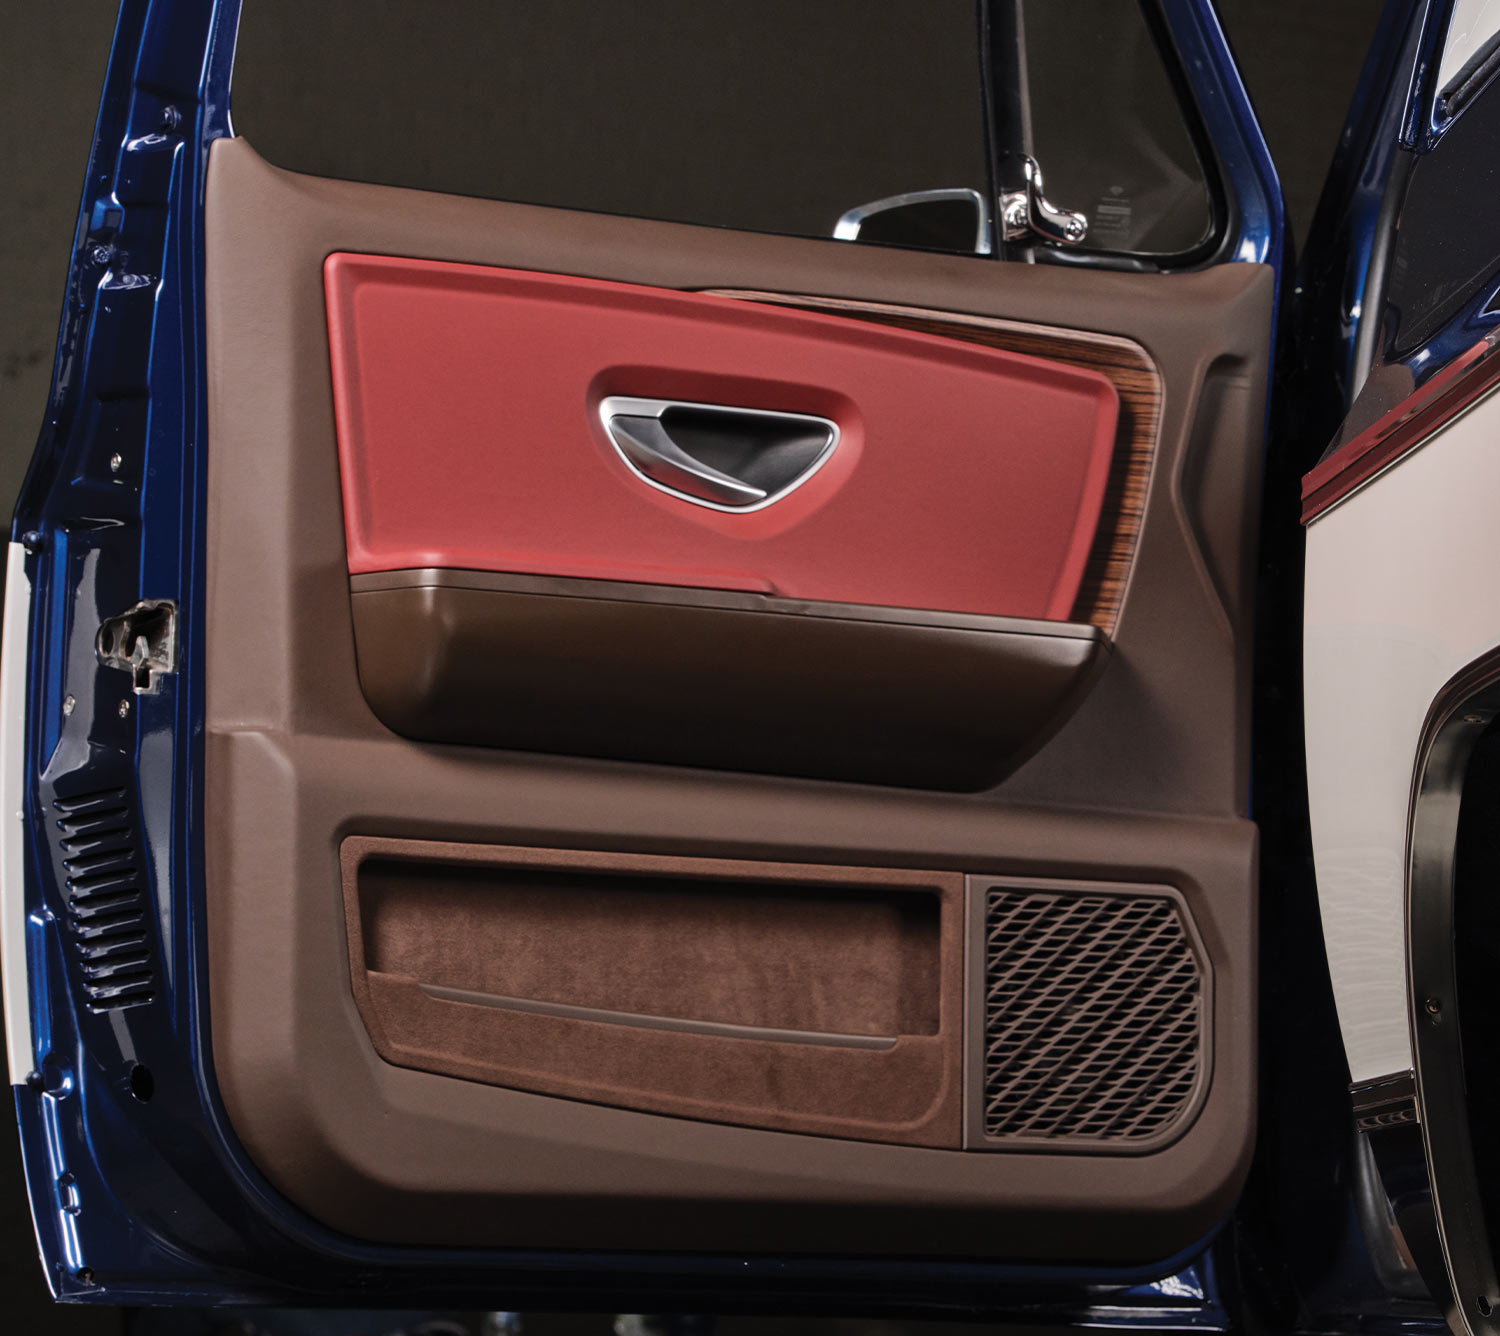 interior side of the driver door, showing the rich dark brown and deep red finish and a brown suede lined door compartment